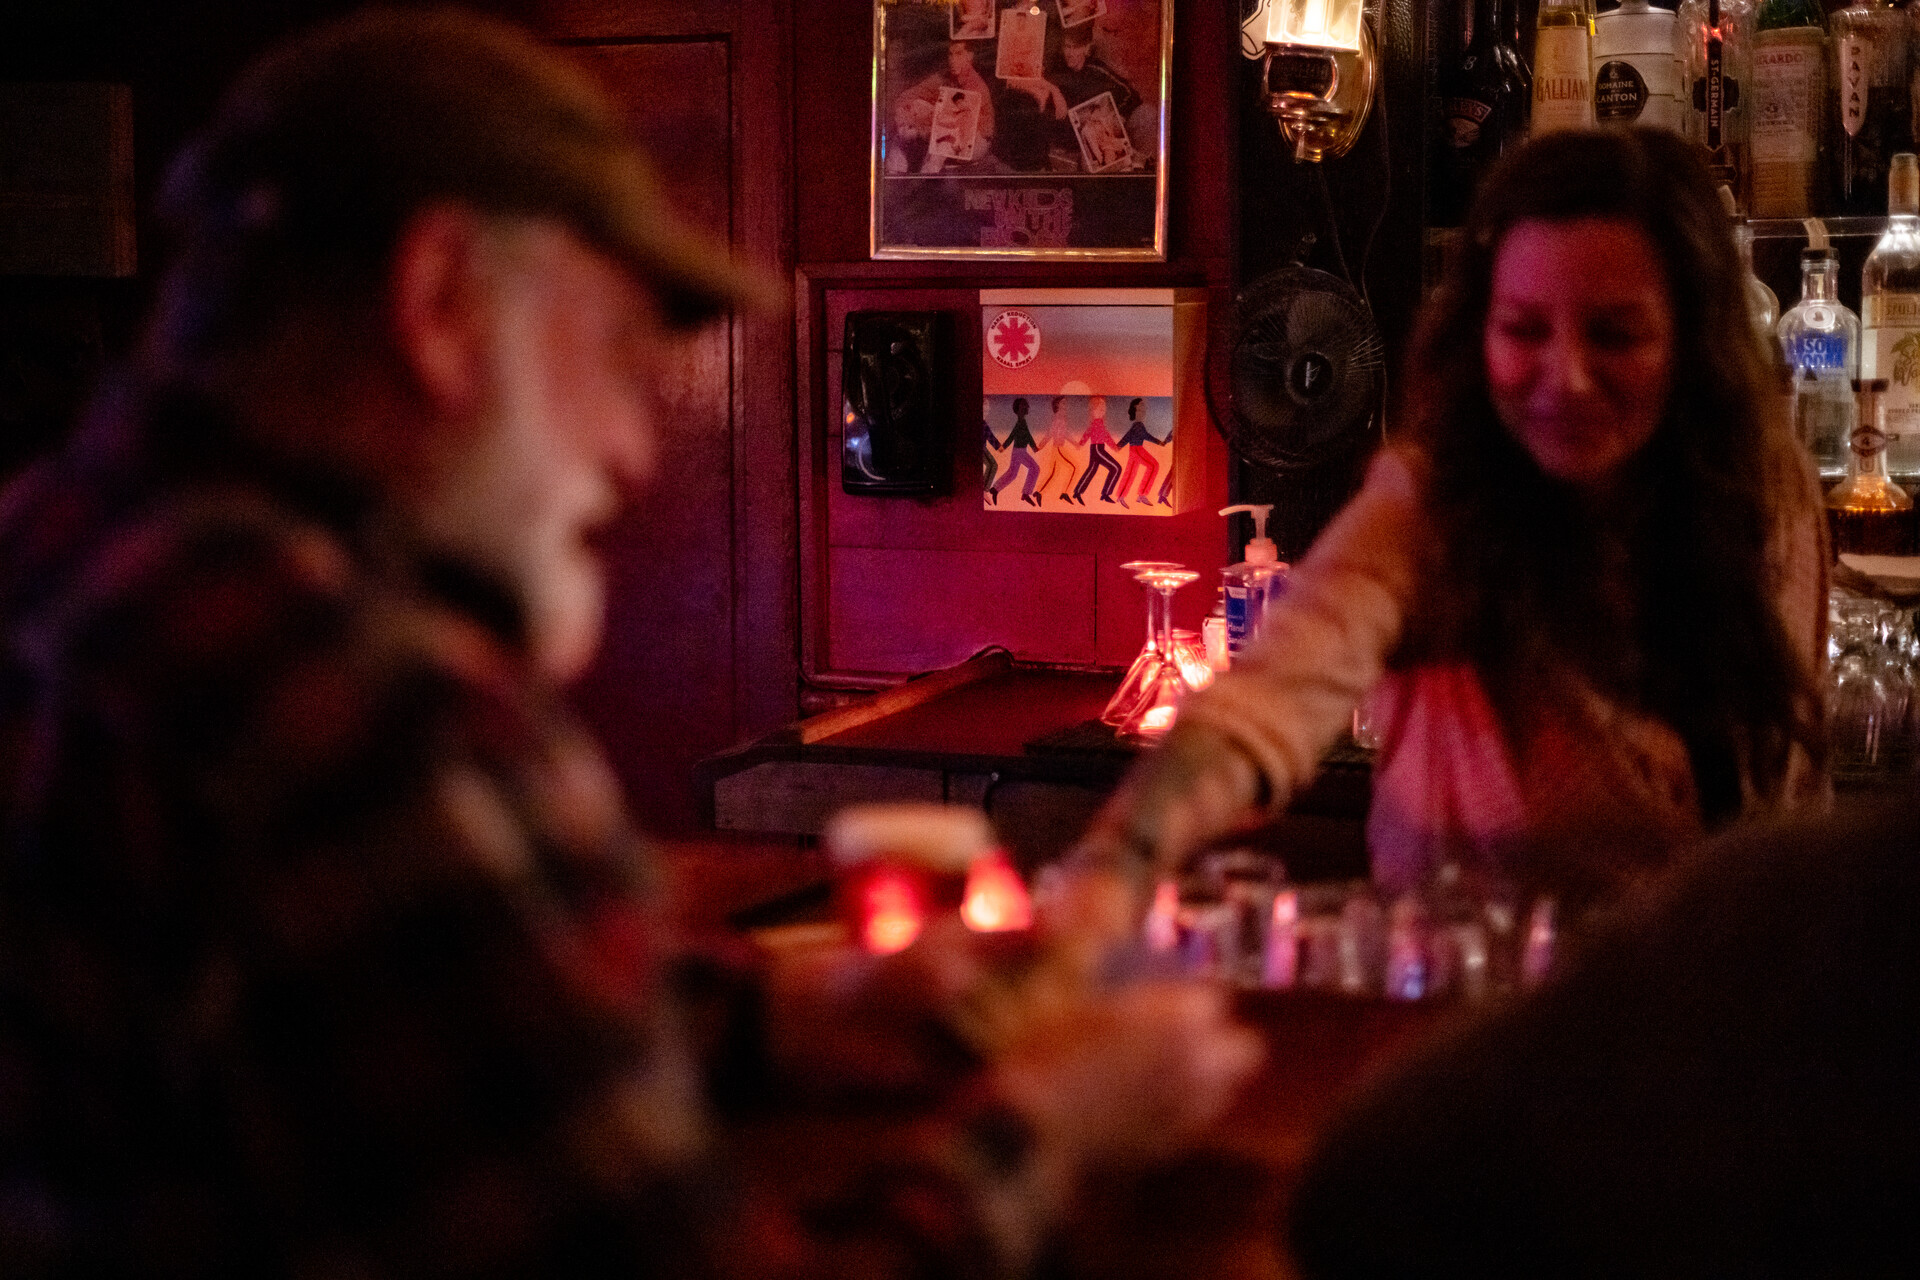 A white woman stands behind a dimly lit bar as an older white man with a white beard speaks smilingly to her